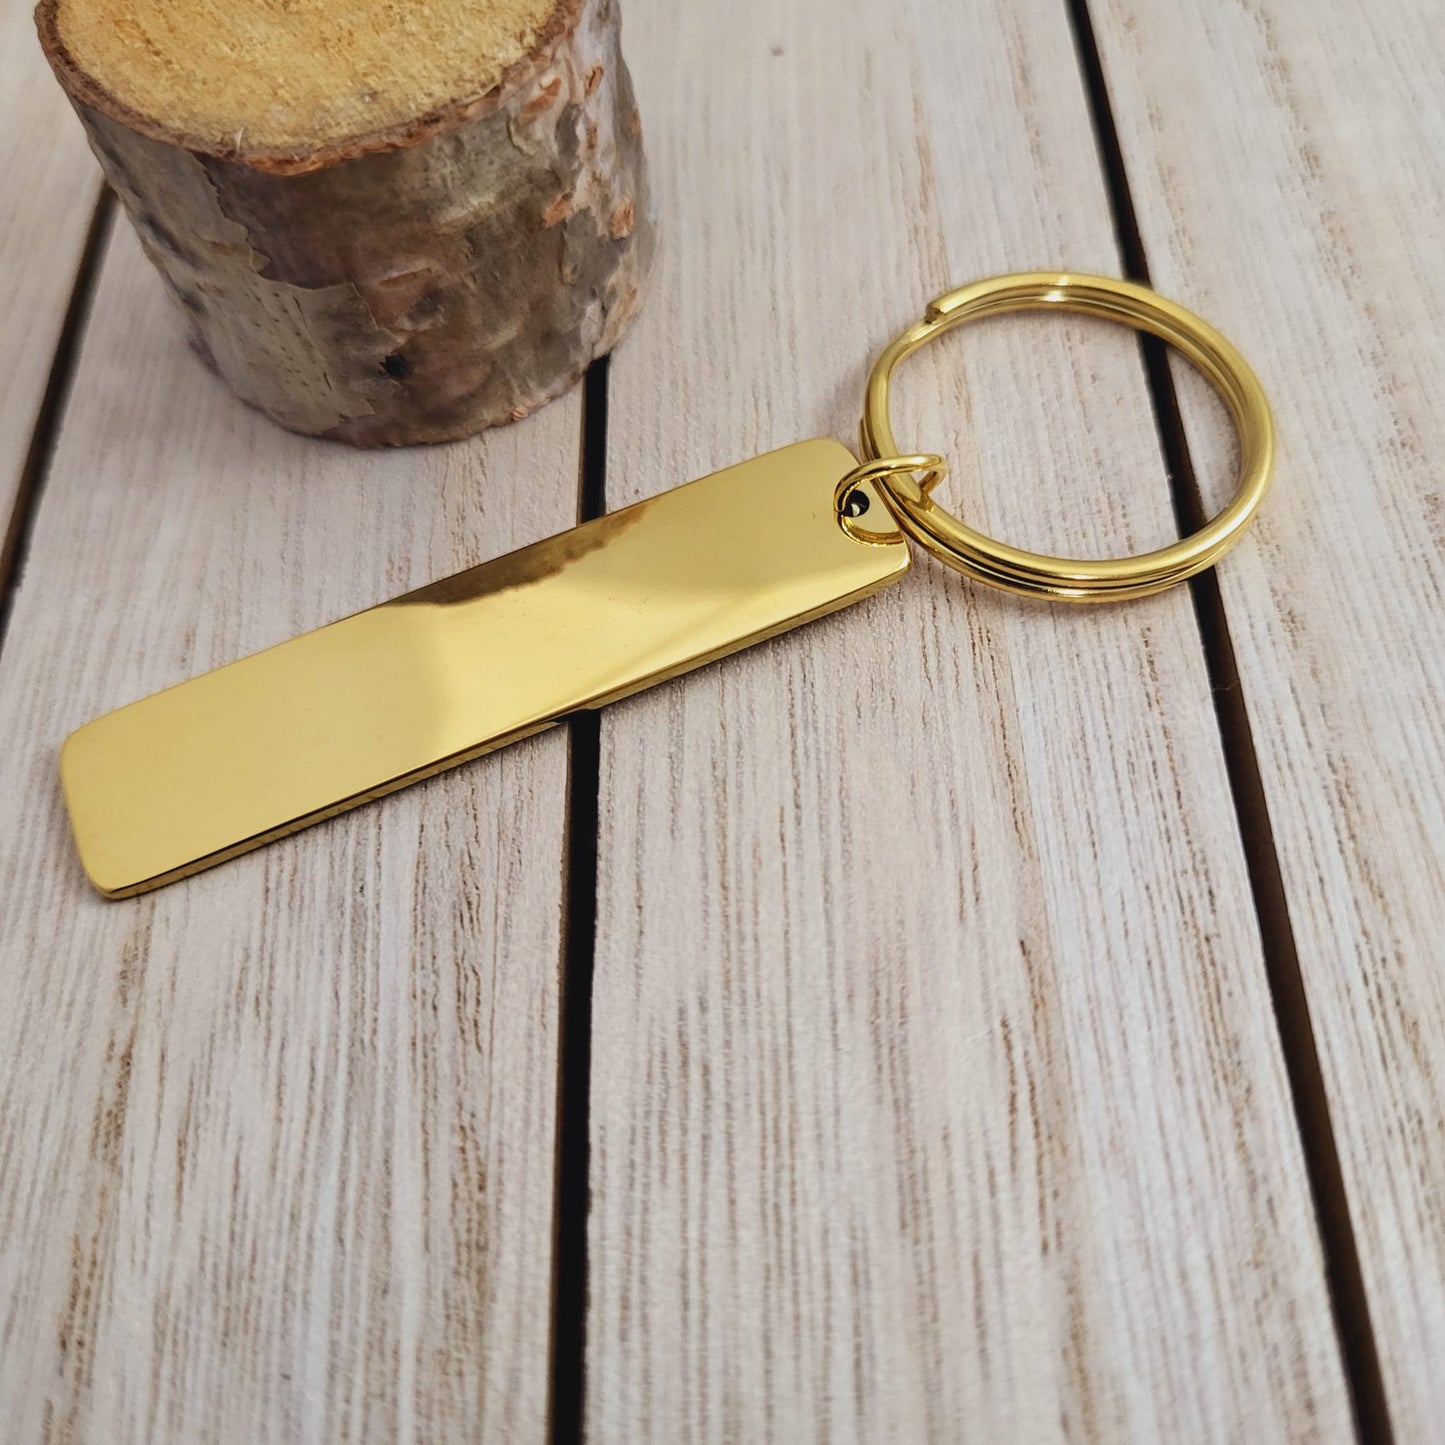 Actual Handwriting Keychain. Engrave a Signature or Handwriting.